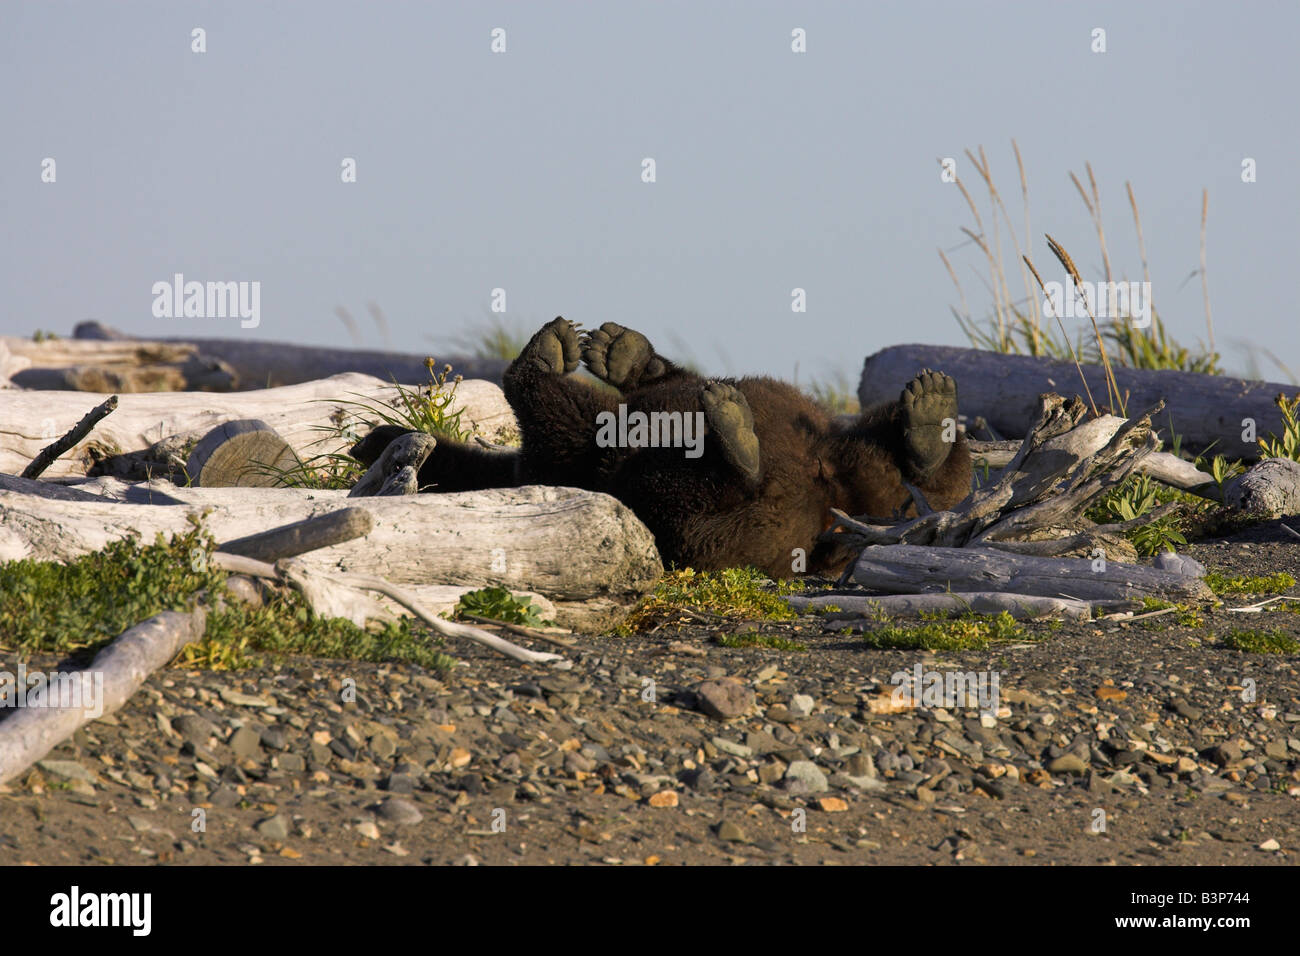 Grizzly Bear Ursus arctos having a great back-scratch amongst driftwood in Hallo Bay, Alaska in September. Stock Photo